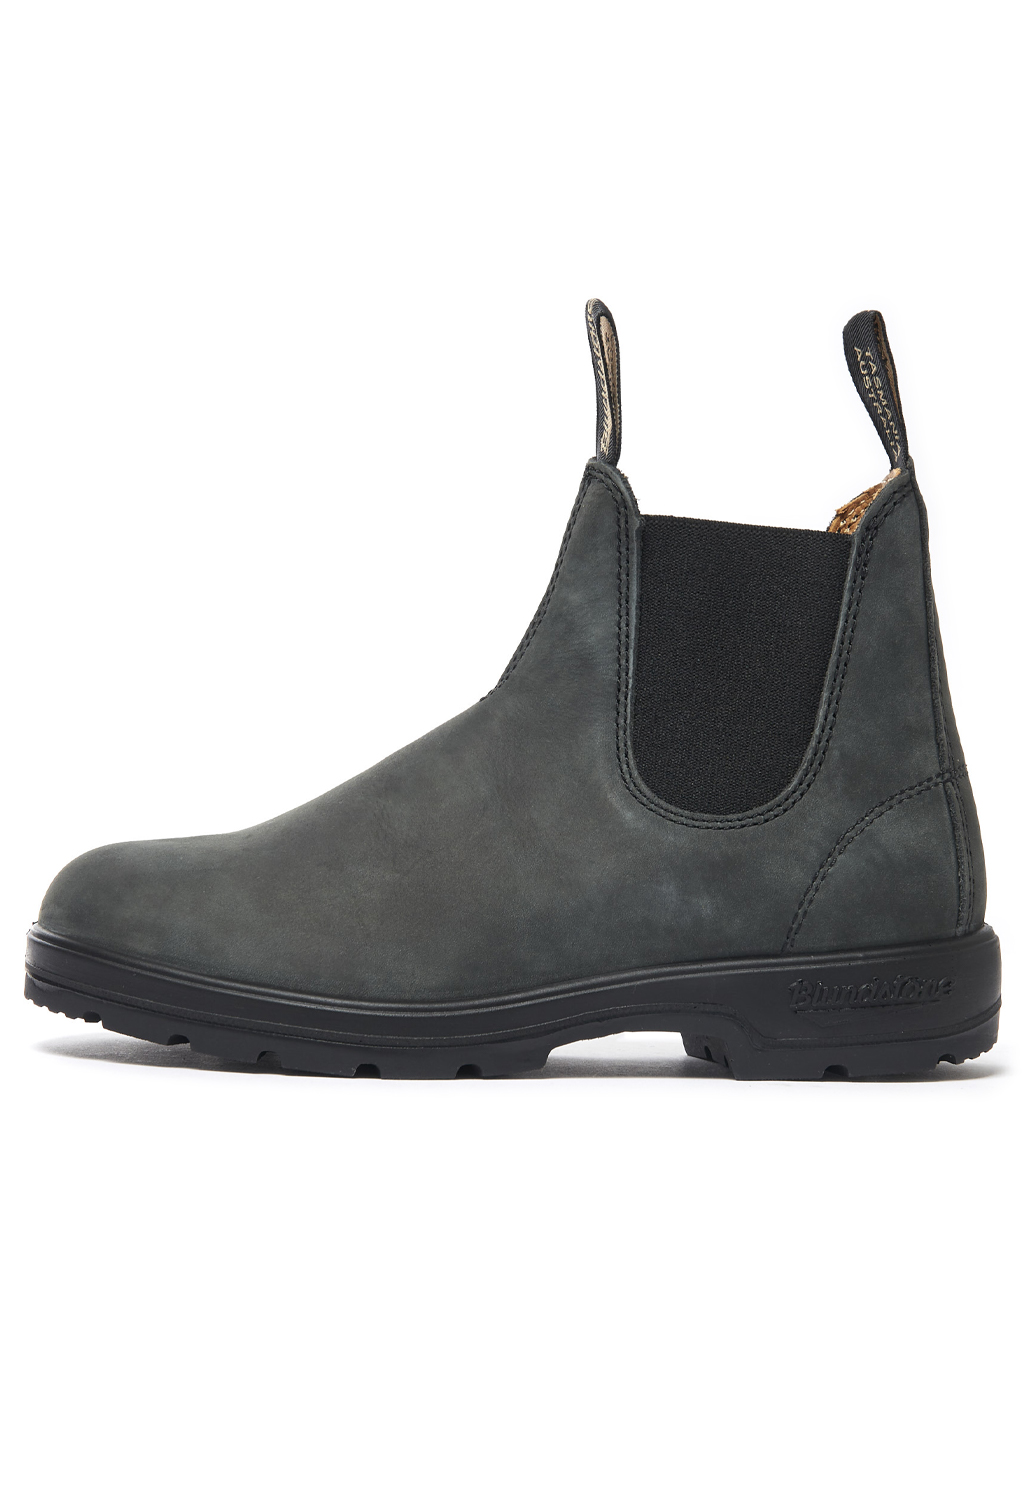 Blundstone 587 Boots